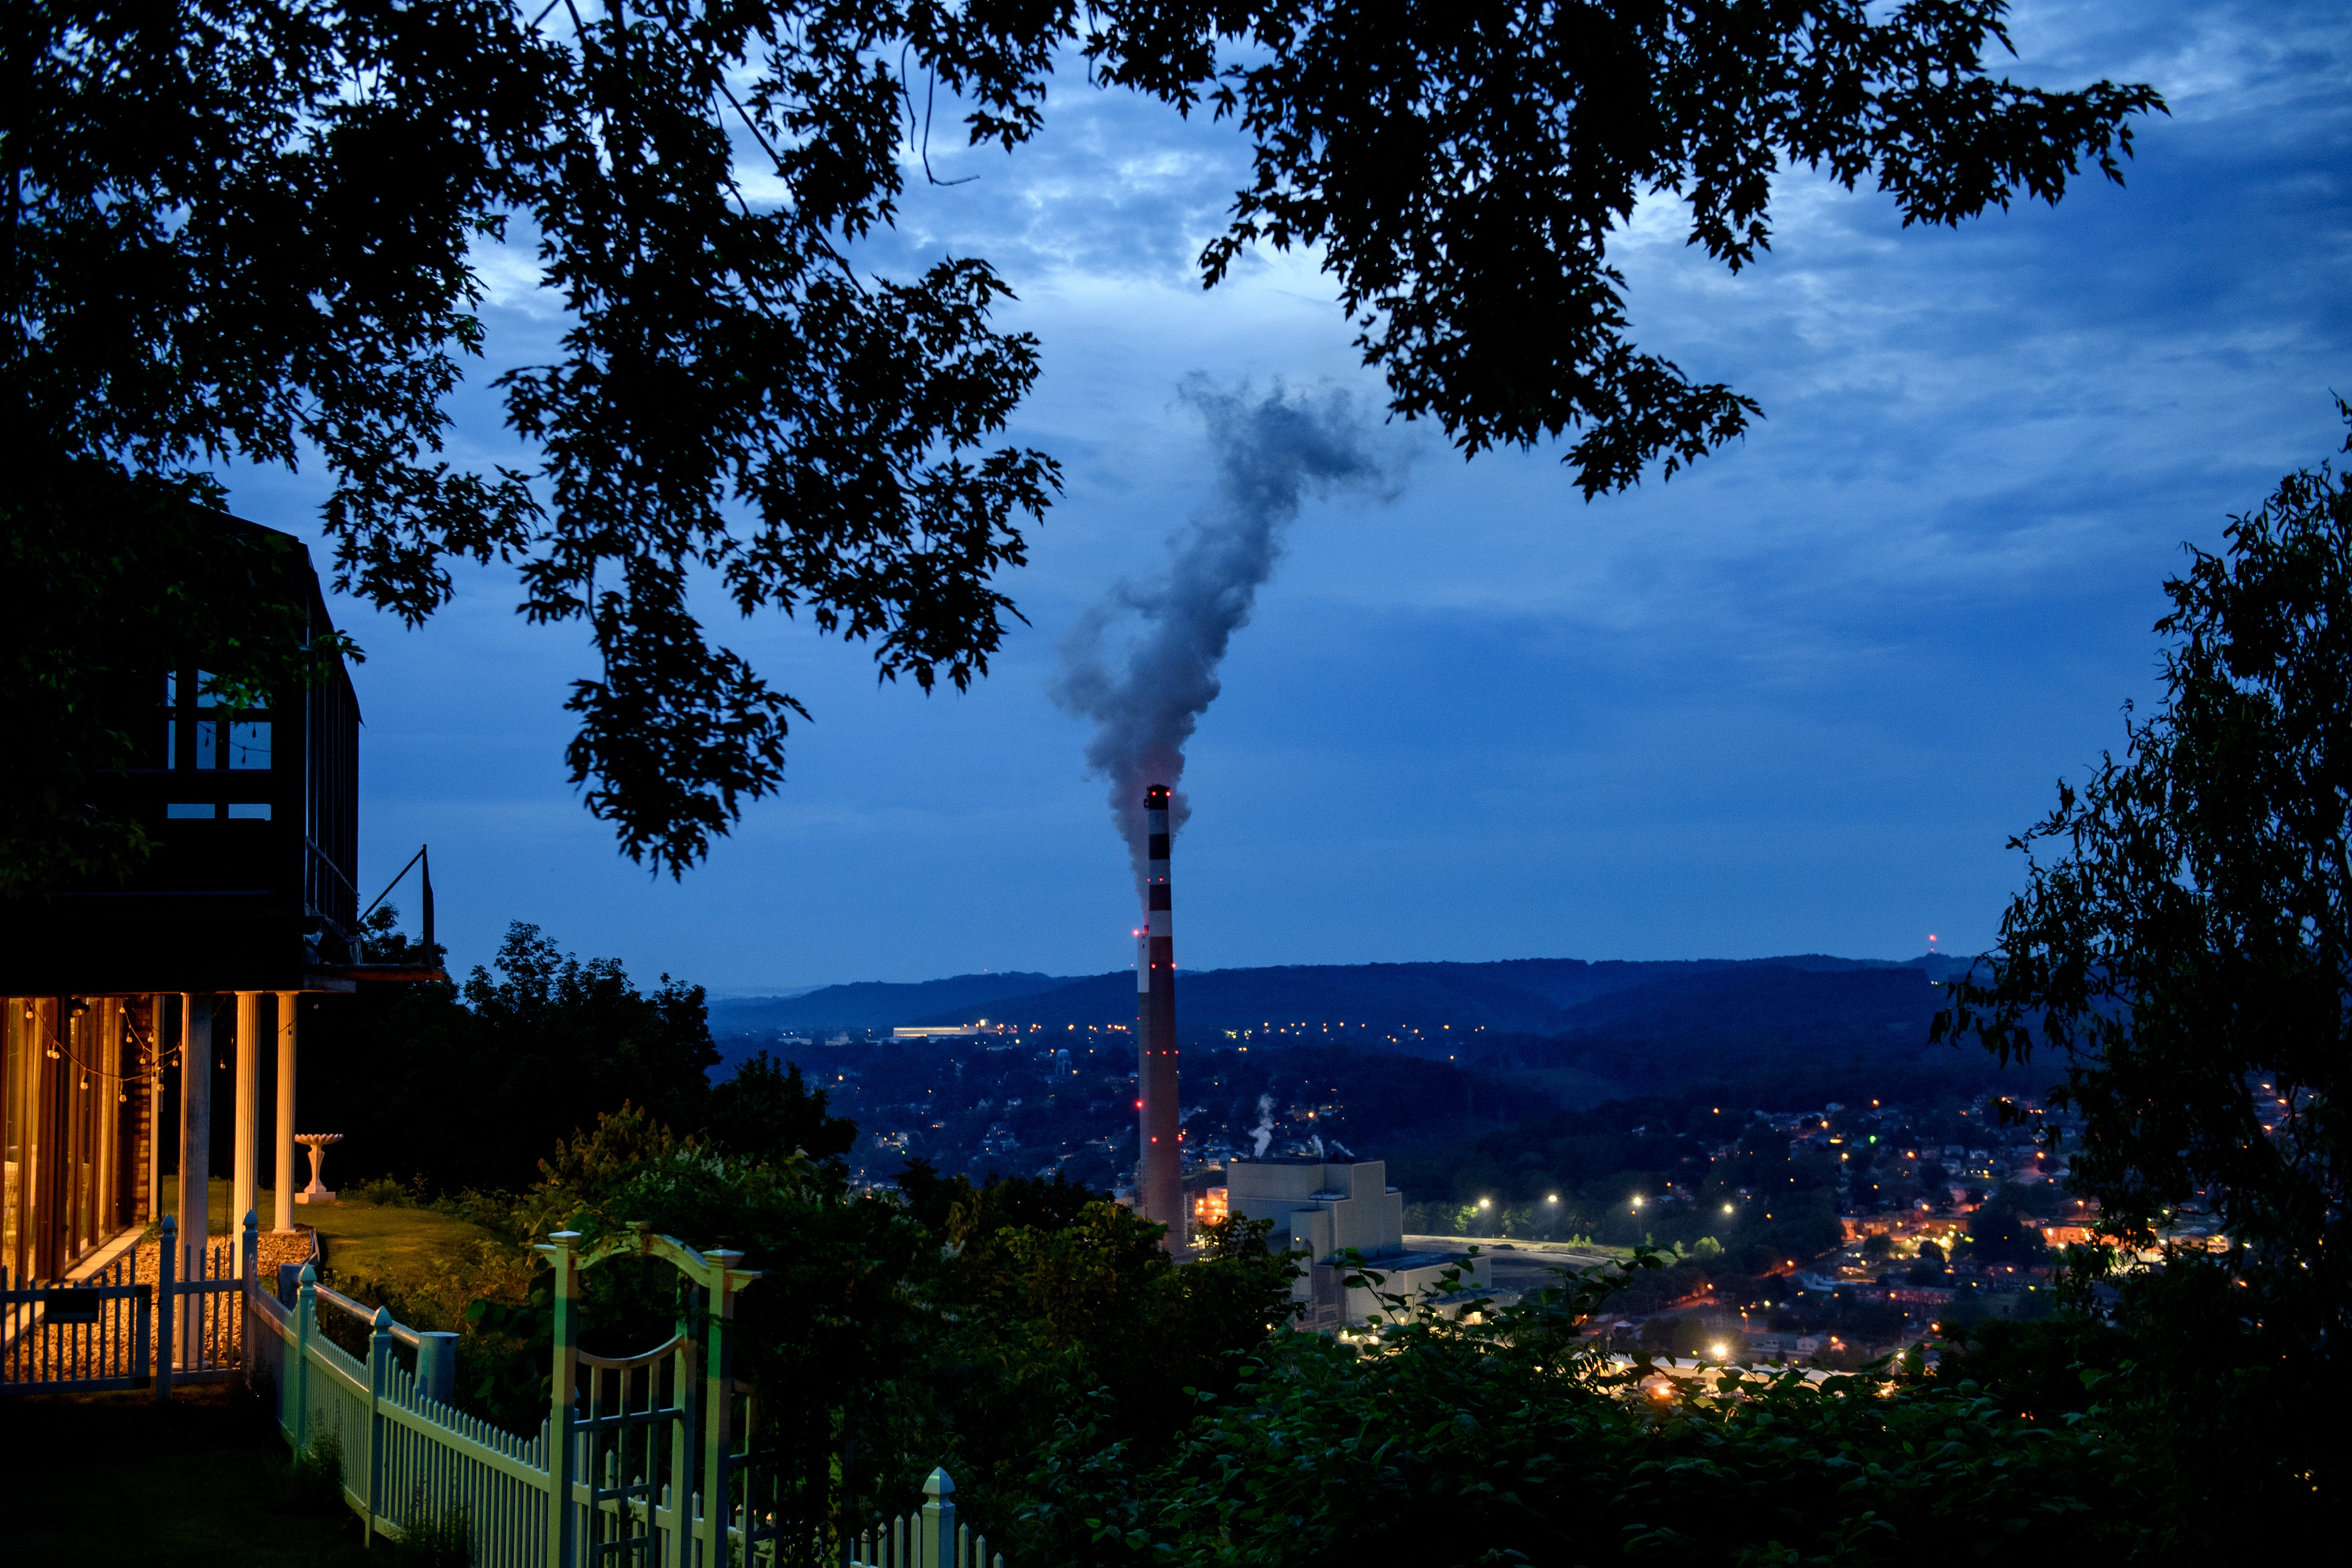 A backyard overlooks GenOn Cheswick Power Station, in Pitttsburgh, US, which burns coal to produce 637 megawatts of electricity